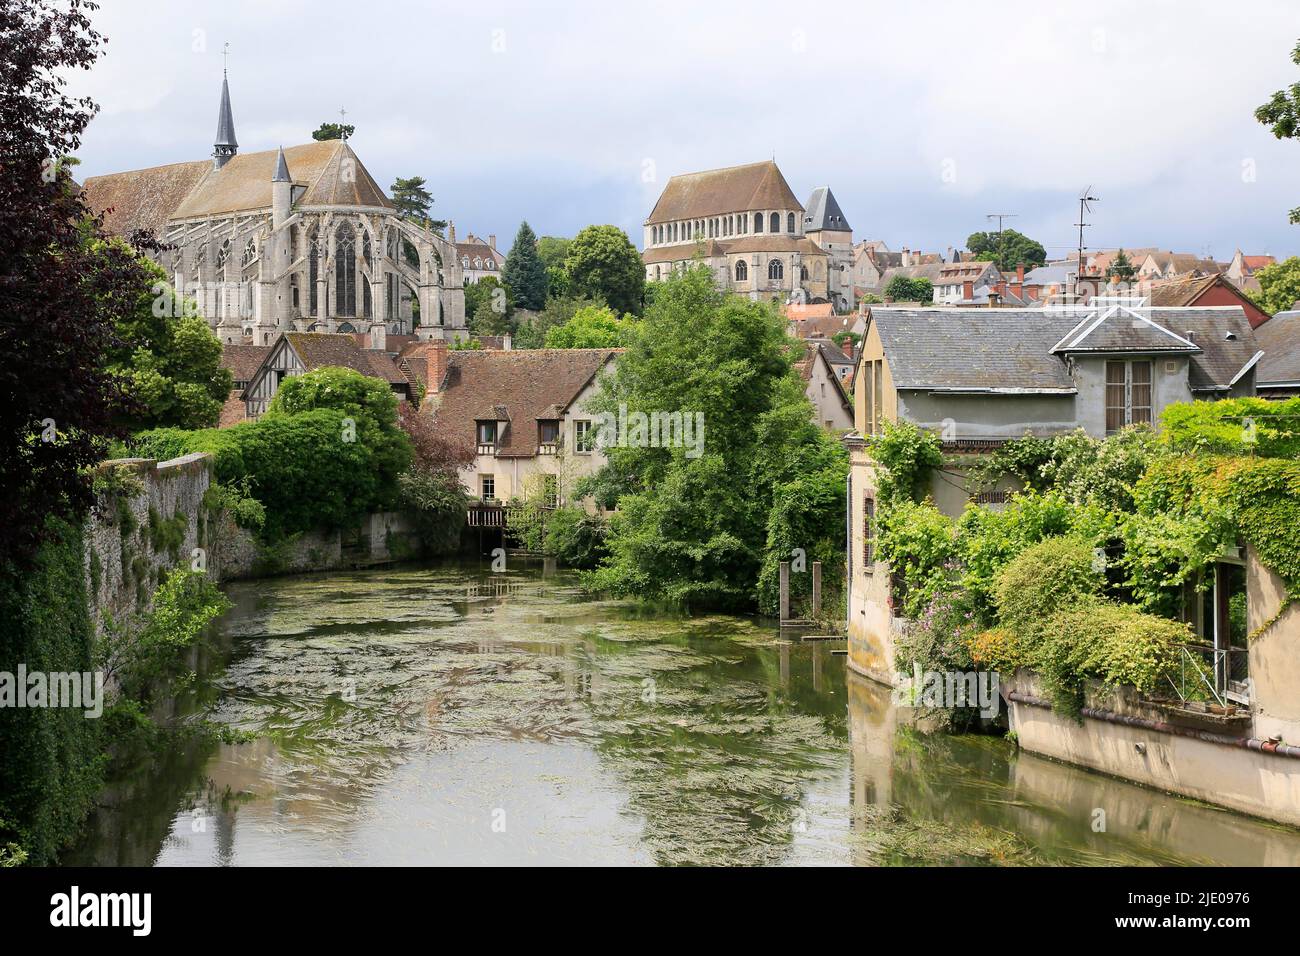 River Eure and churches of St Pierre and St Aignan, Chartres, Eure-et-Loir, France, Europe Stock Photo